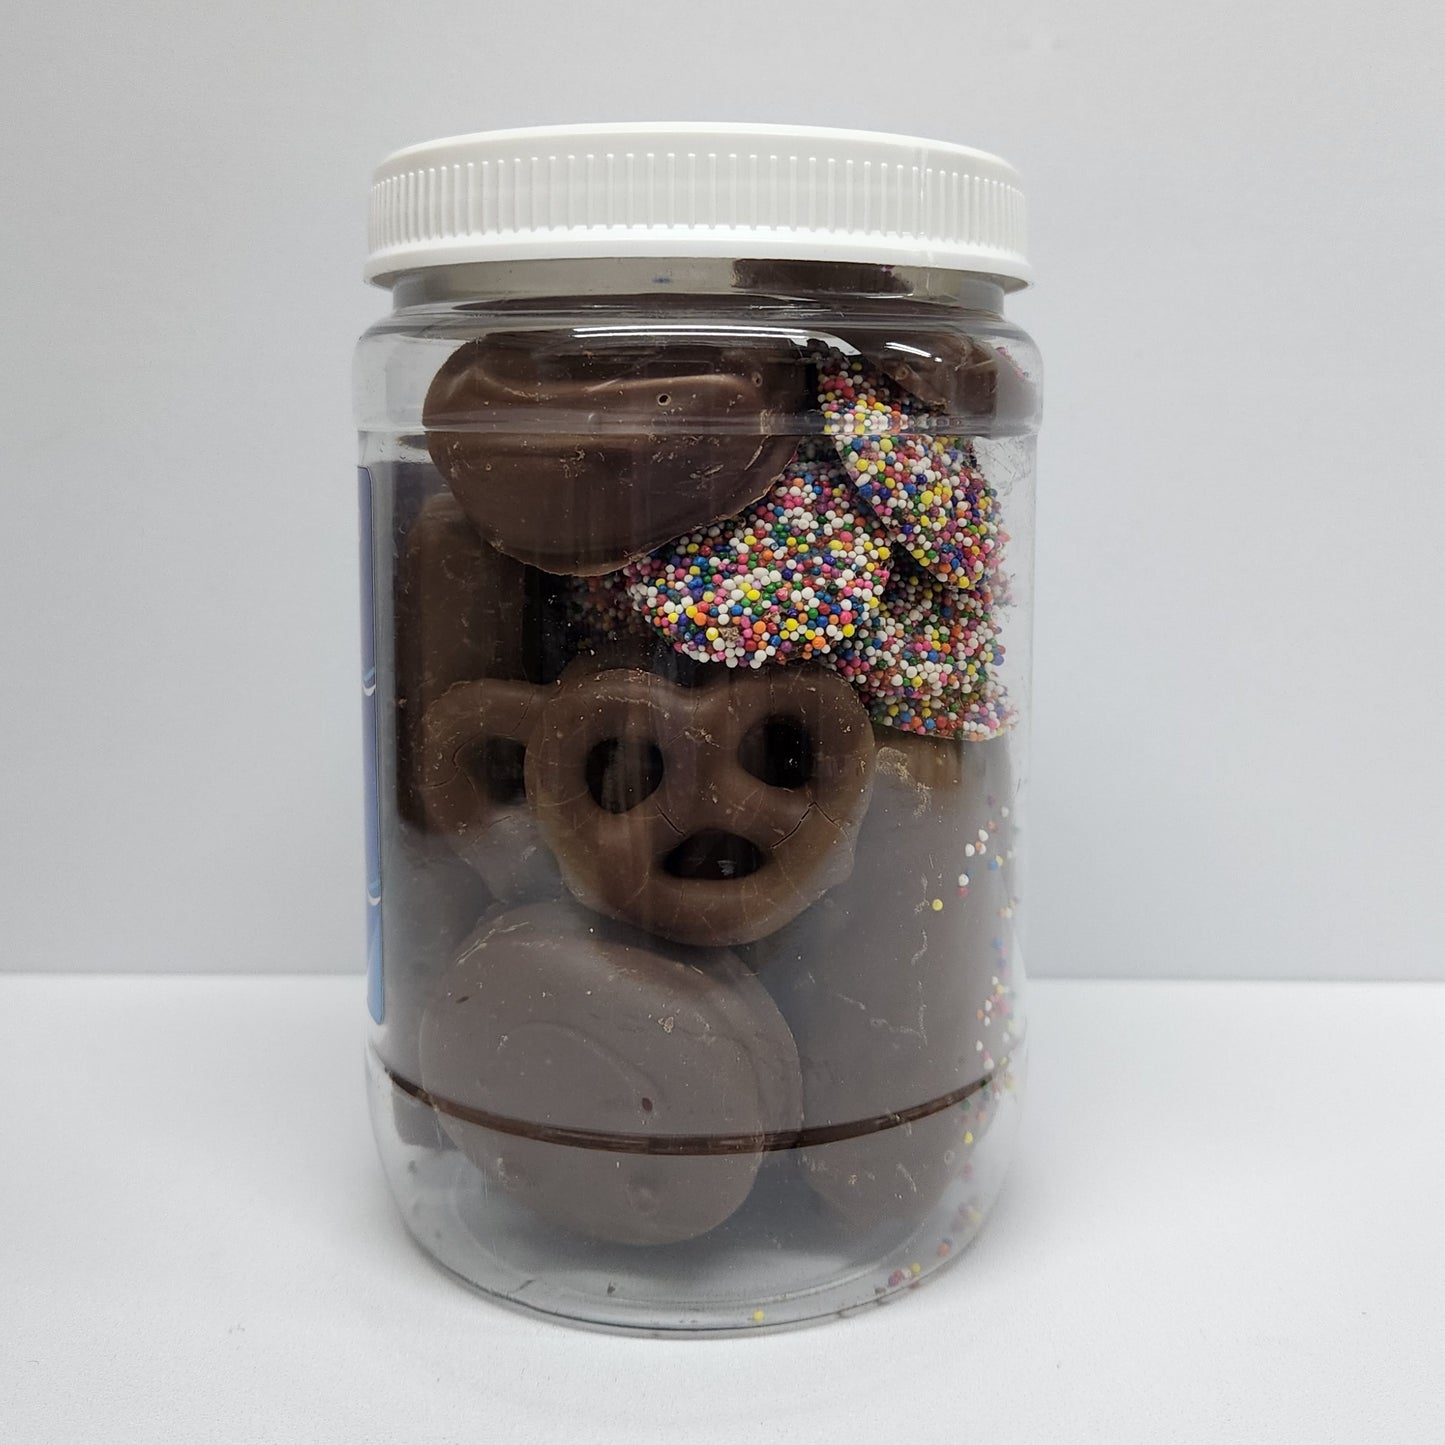 Chocolate Covered Oreos, Pretzels, Wafer Cookies, Shortbread Cookie, a Rice Krispie Treat, a Twinkie, and Nonpareils in a jar